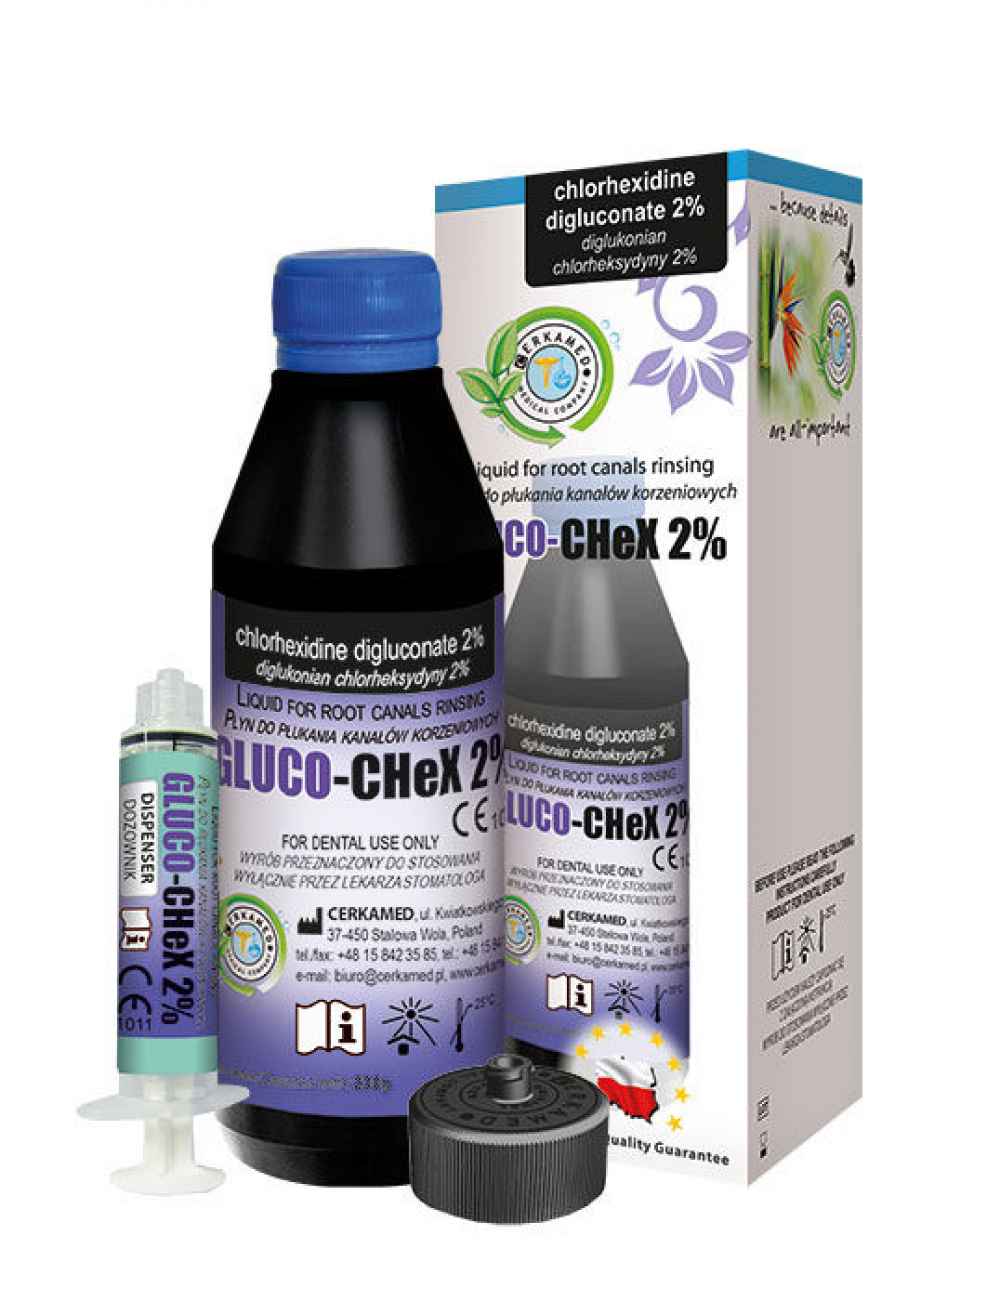 Cerkamed Gluco Chex-2 200-ML Liquid for root canal rinsing